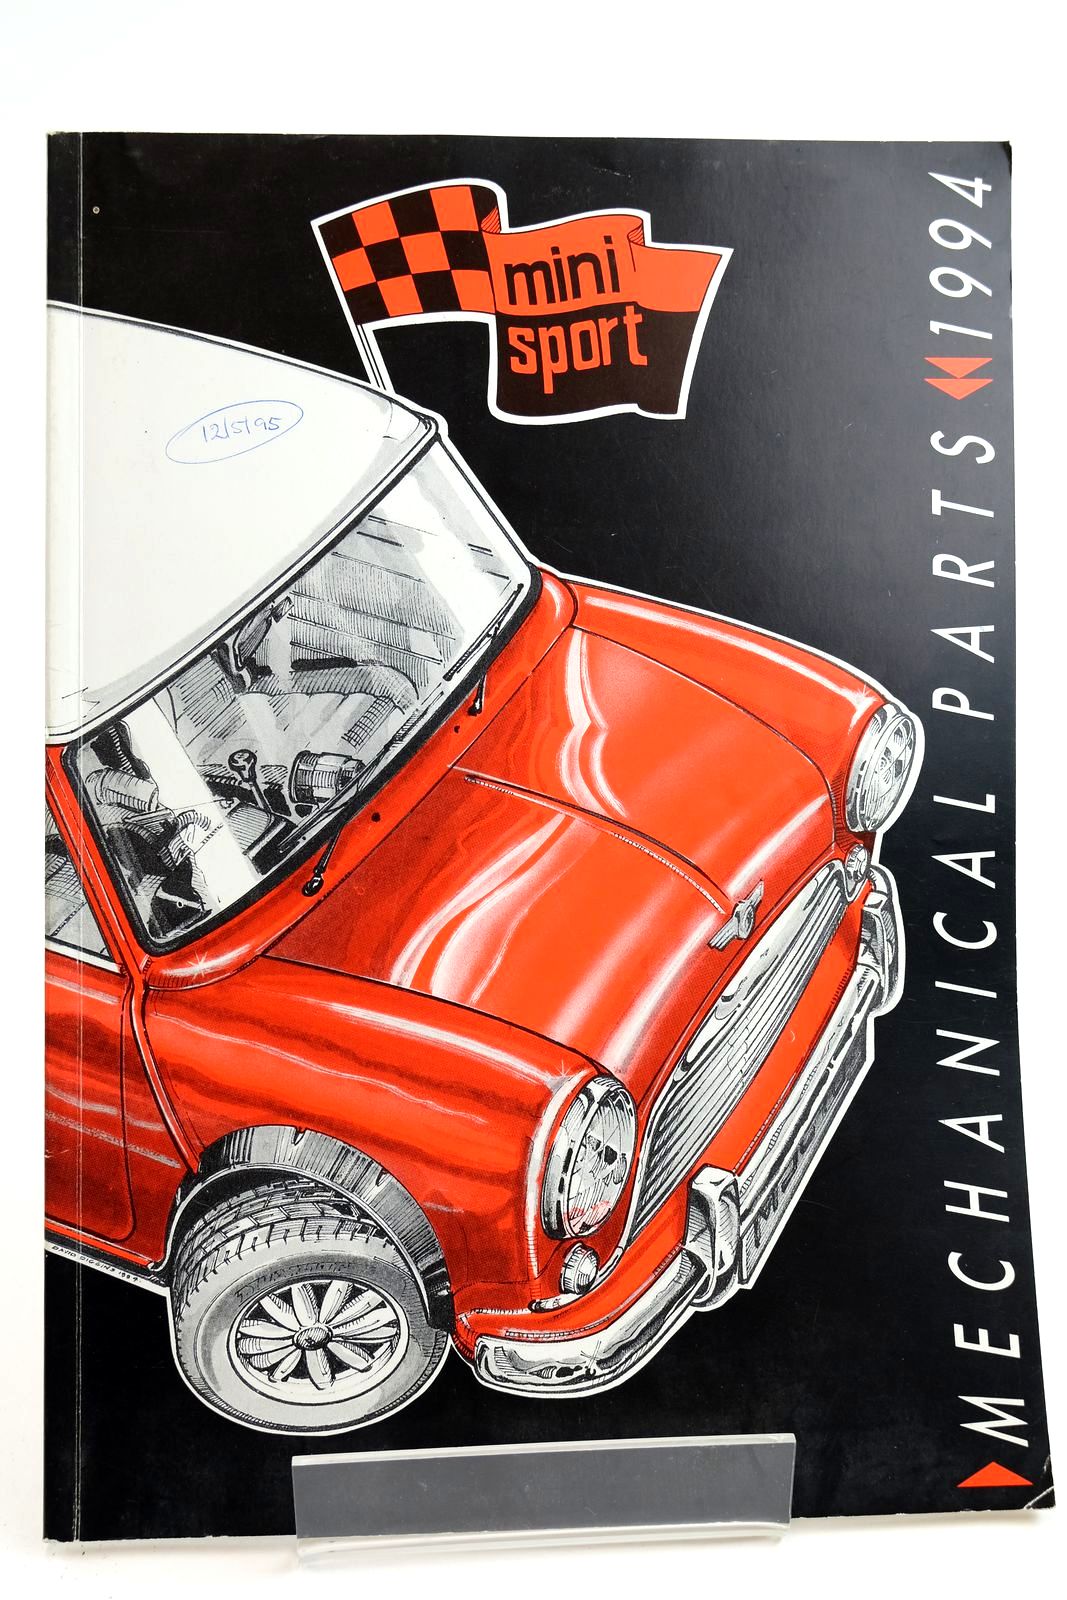 Photo of MINI MECHANICAL PARTS CATALOGUE 1959 - 1994 published by Mini Sport Ltd (STOCK CODE: 2132261)  for sale by Stella & Rose's Books